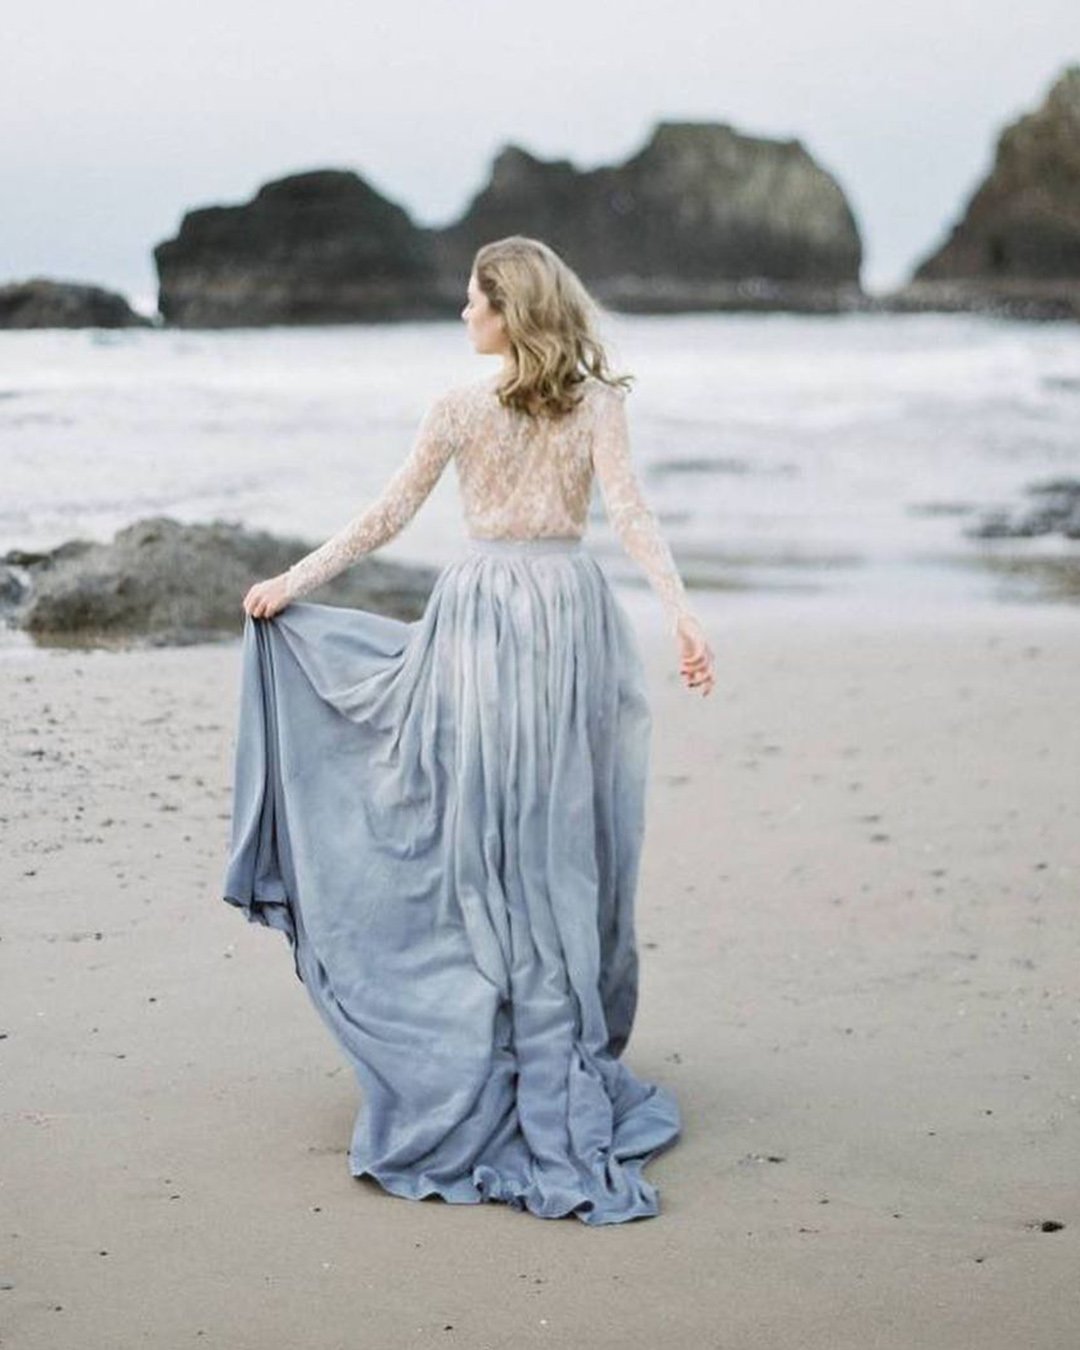 blue wedding dresses white lace top with sleeves beach emilyriggsofficial